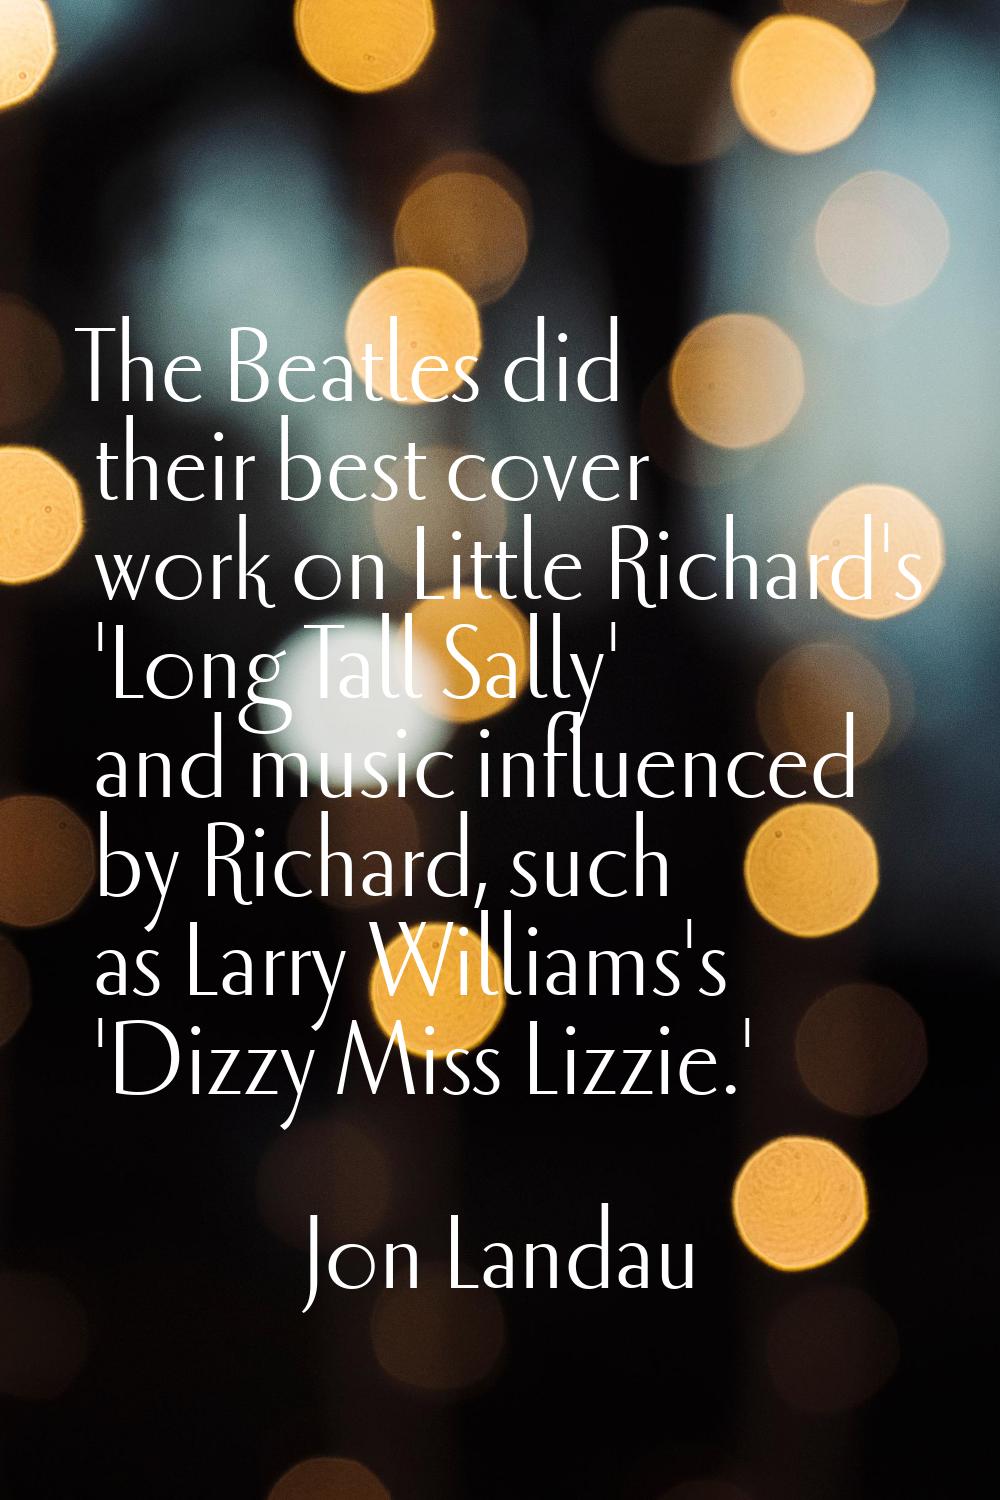 The Beatles did their best cover work on Little Richard's 'Long Tall Sally' and music influenced by